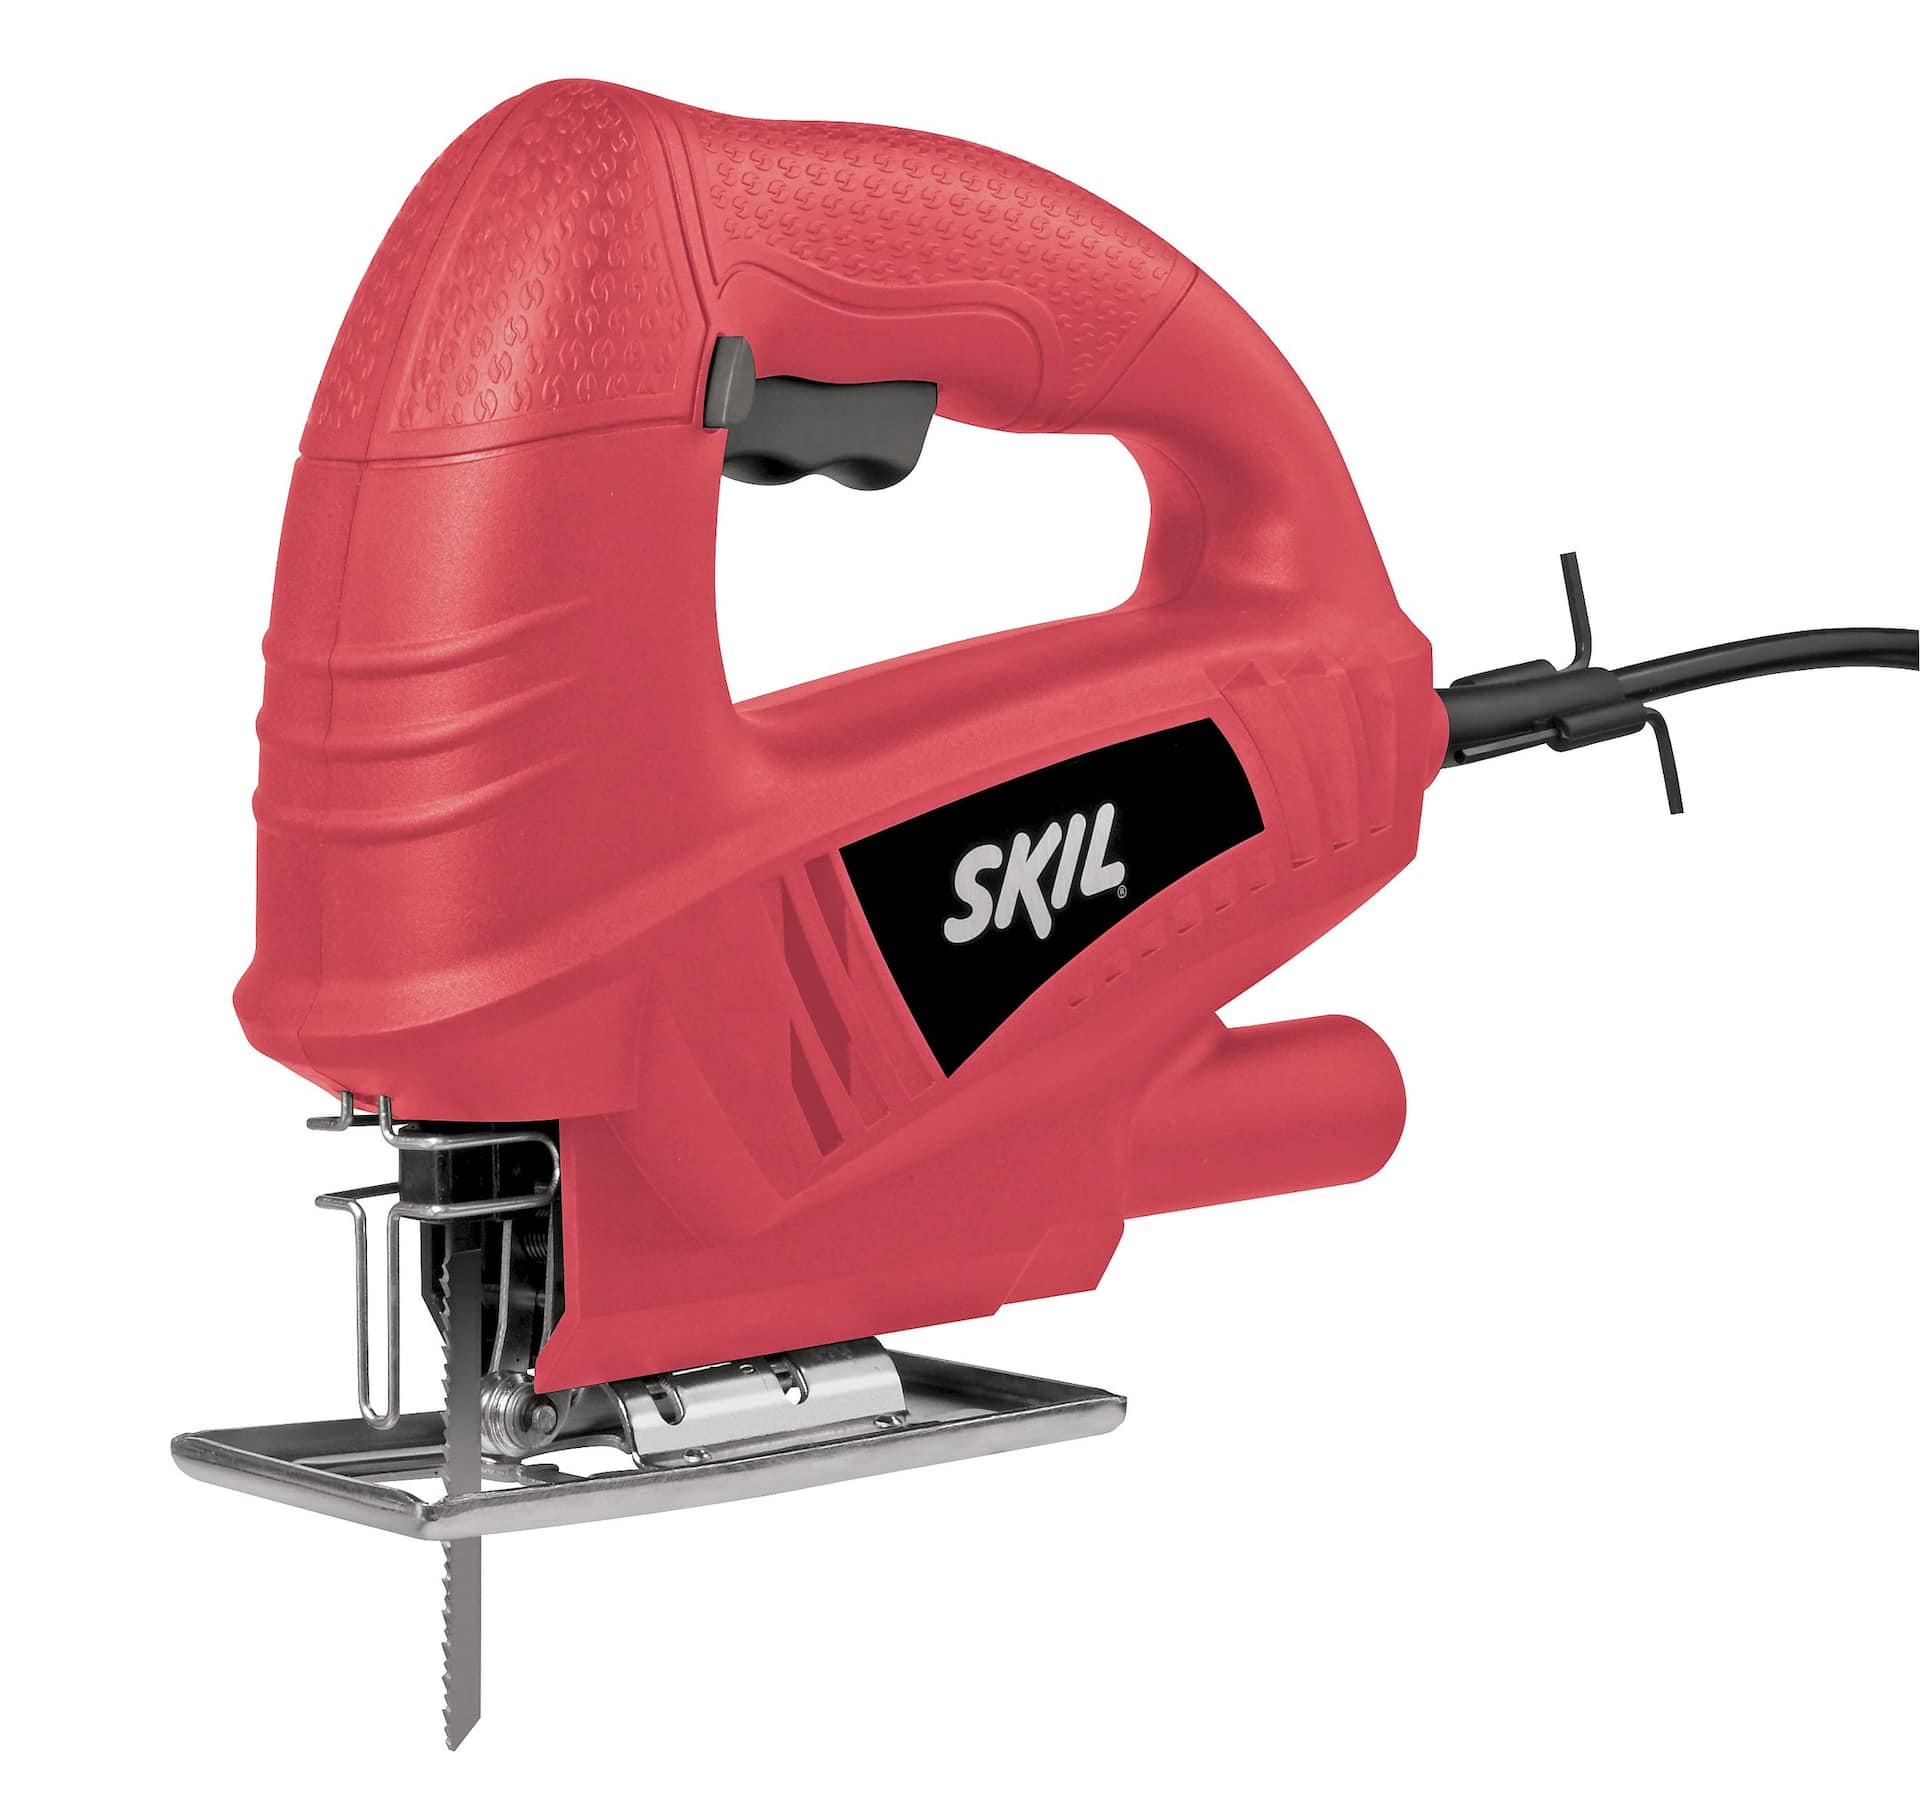 SKIL 3.2 Amp Corded Jig Saw | Canadian Tire